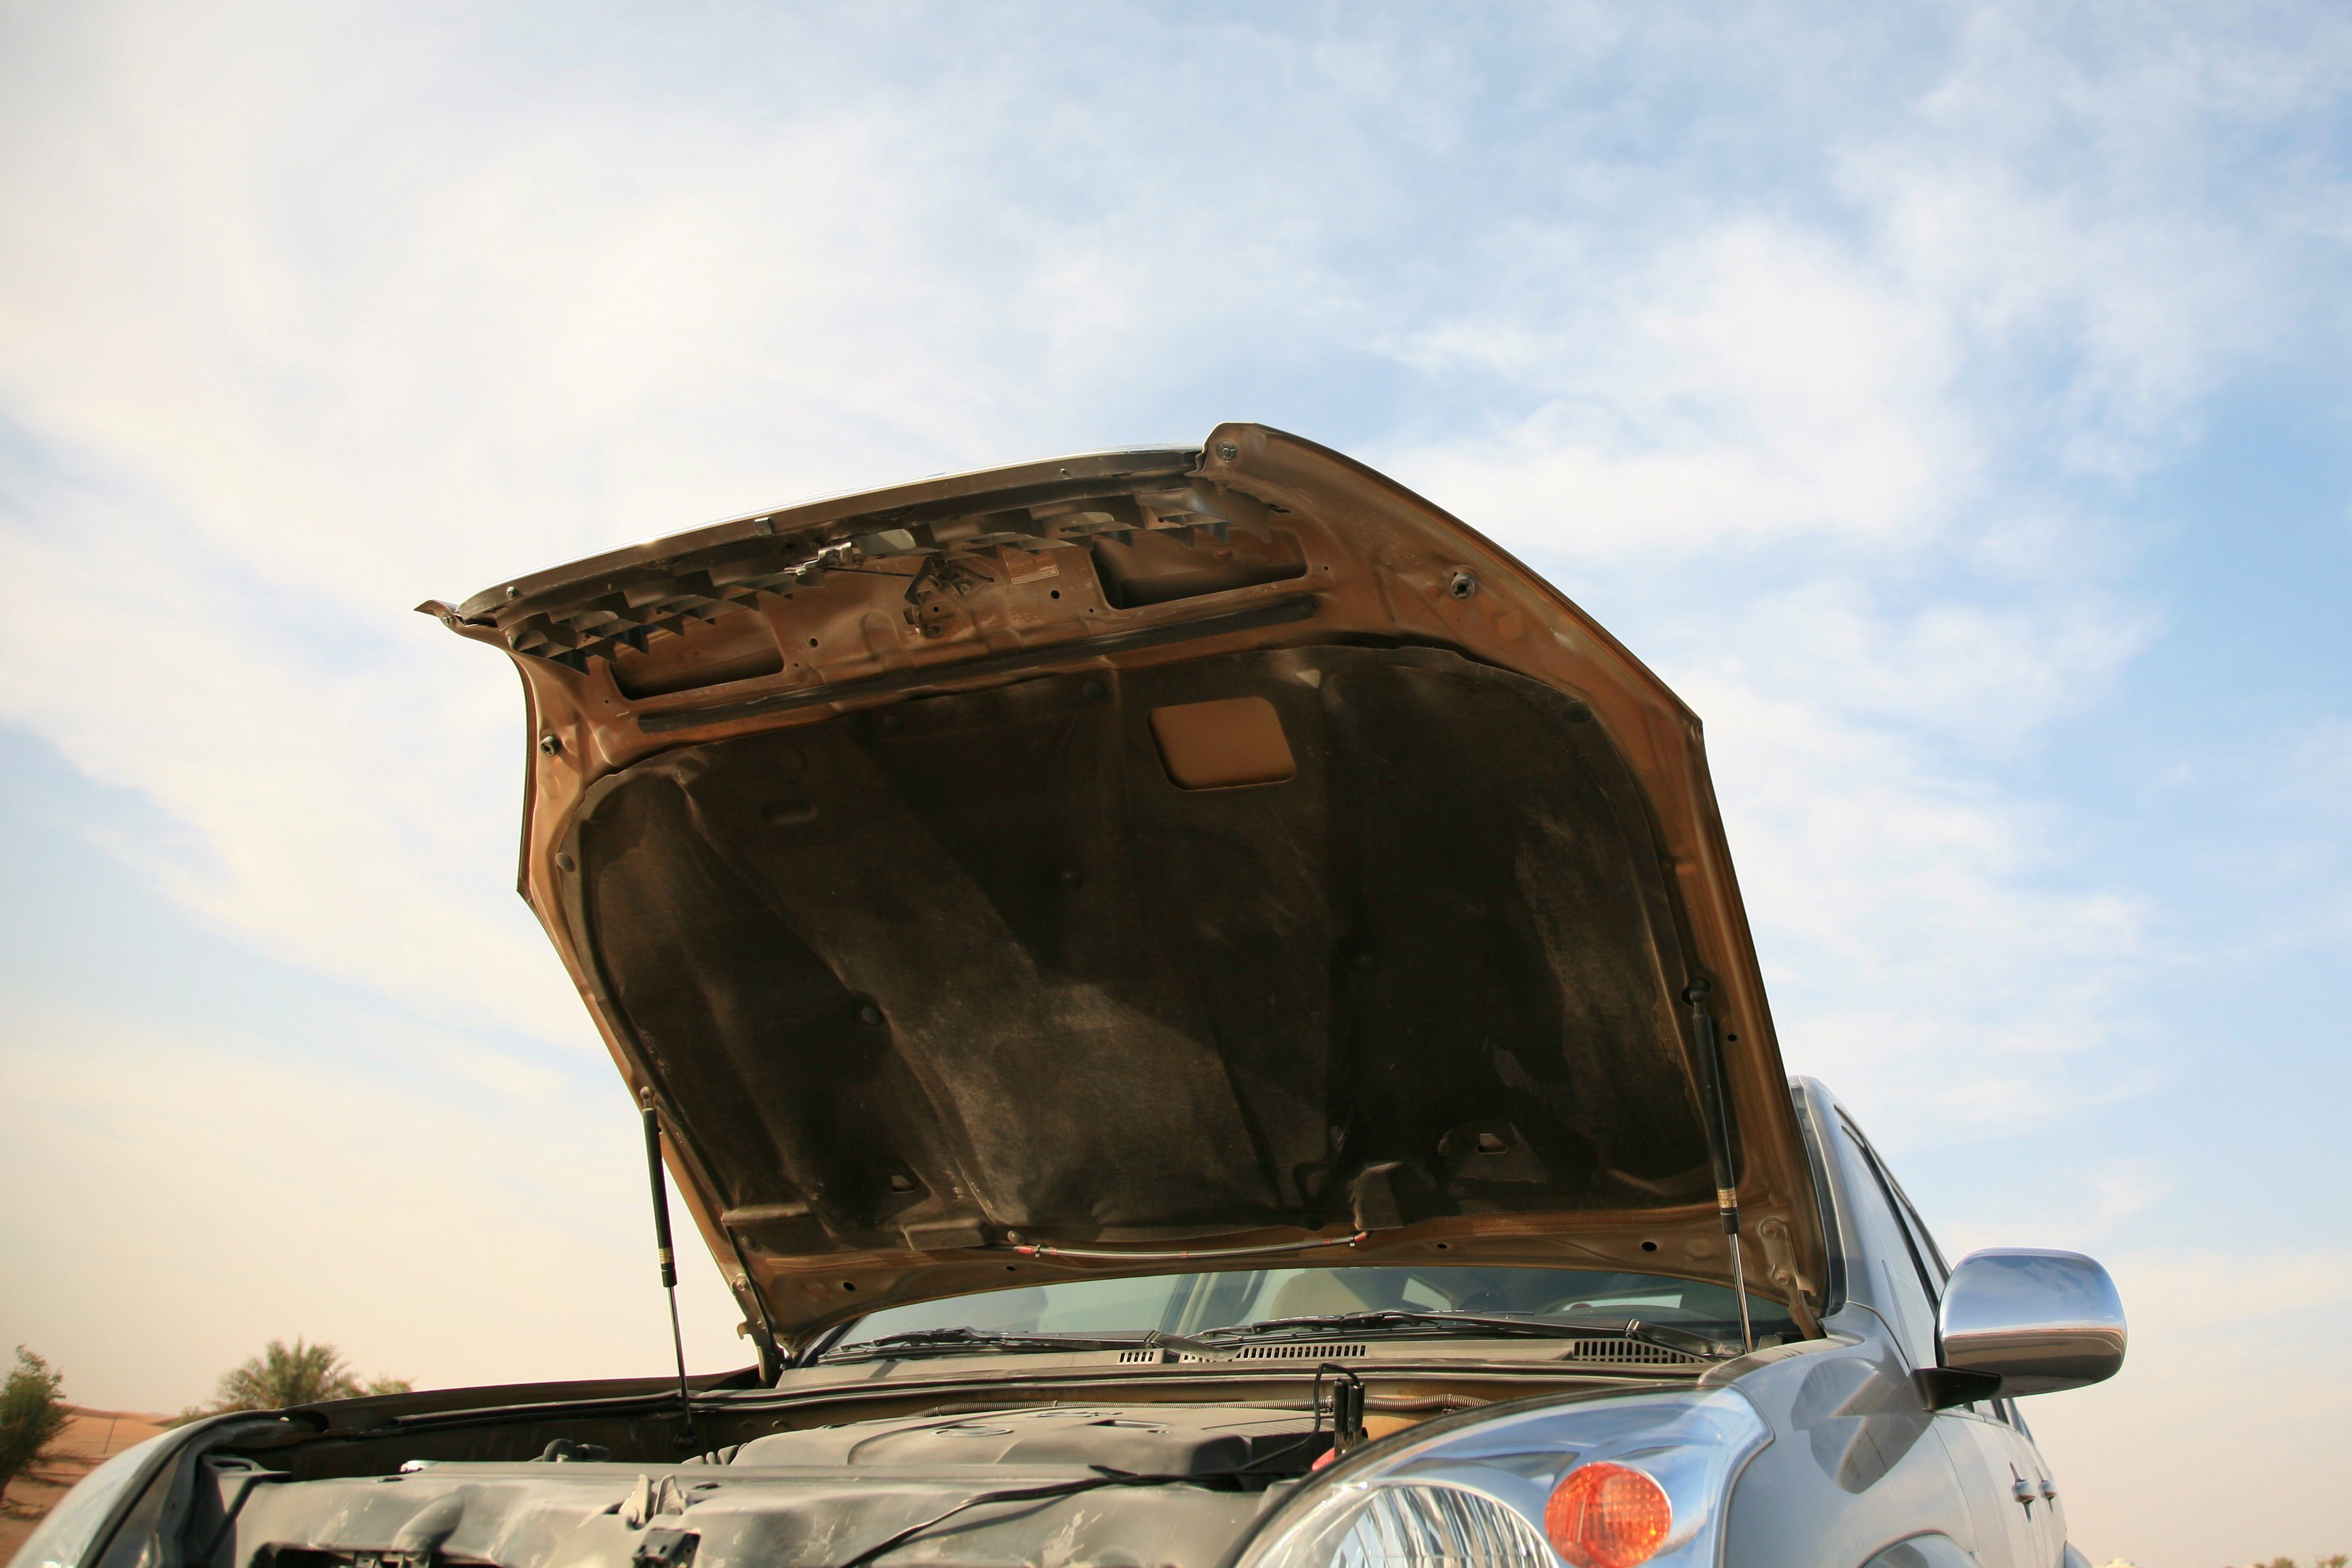 Lifted hood of a car showing damage inside